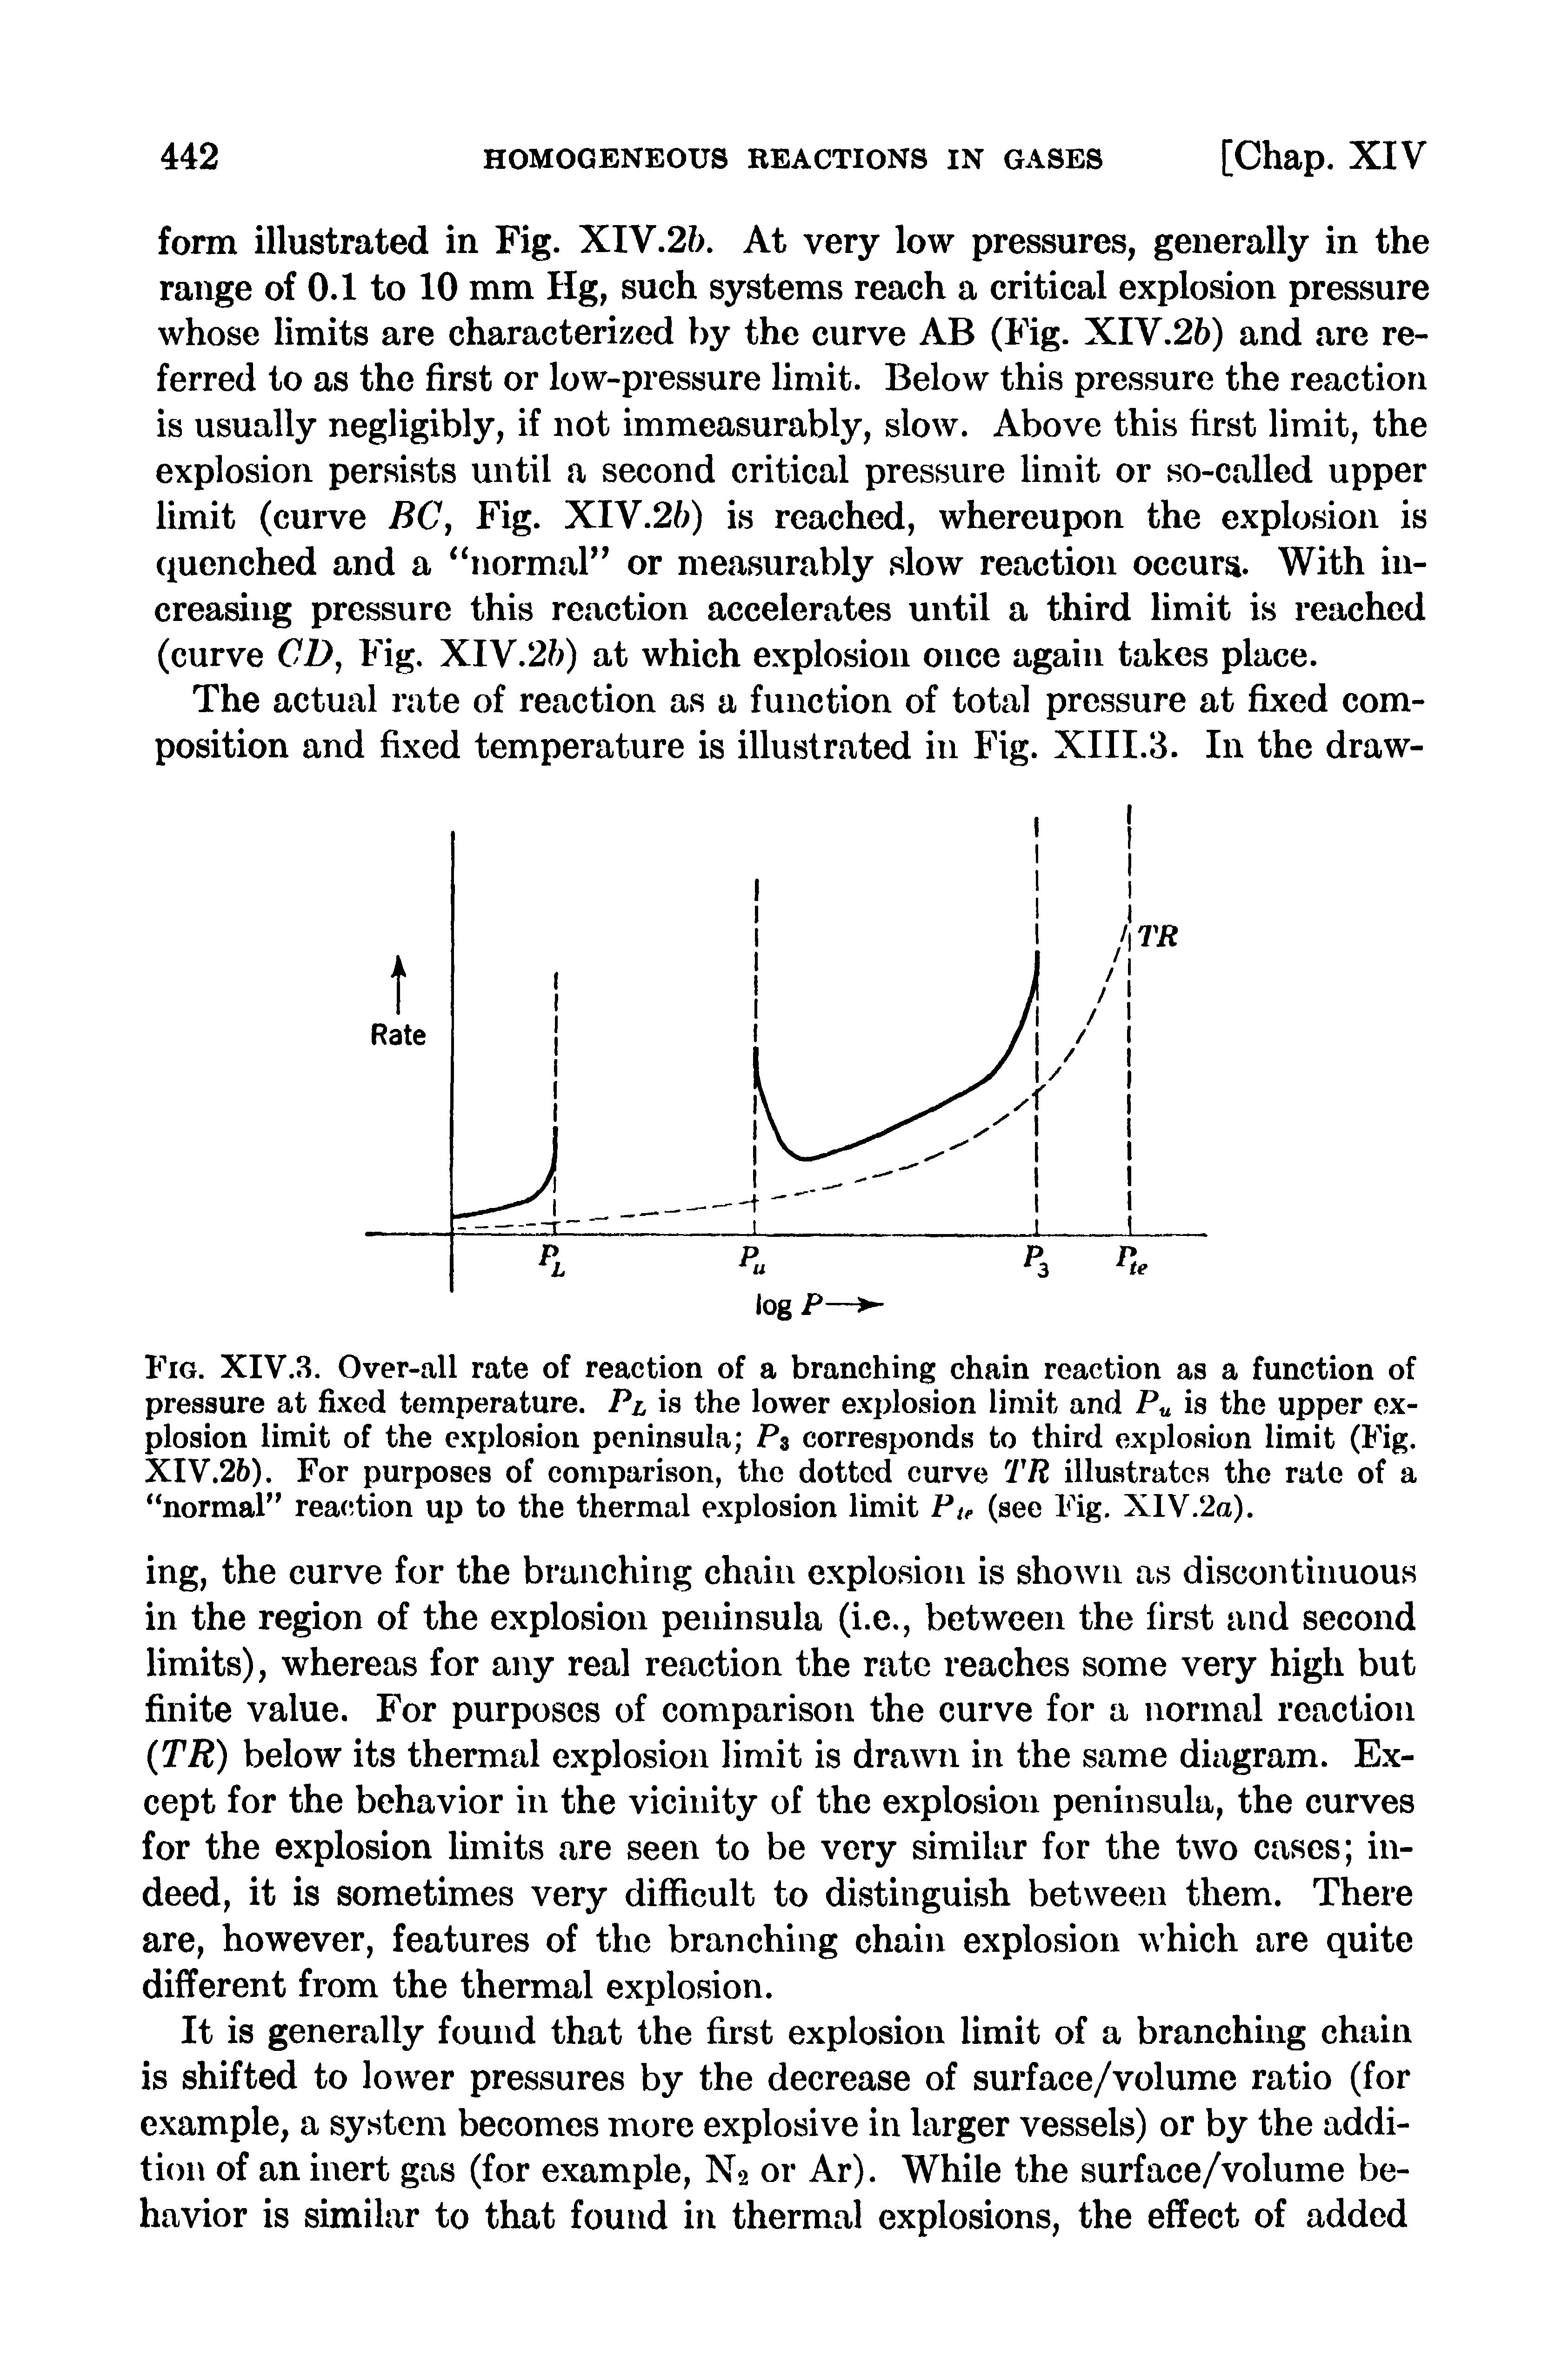 Fig. XIV.3. Over-all rate of reaction of a branching chain reaction as a function of pressure at fixed temperature. Pl is the lower explosion limit and P is the upper explosion limit of the explosion peninsula Pz corresponds to third explosion limit (Fig. XIV.26). For purposes of comparison, the dotted curve TR illustrates the rate of a normal rea( tion up to the thermal explosion limit Pte (see Fig. XlV.2a).